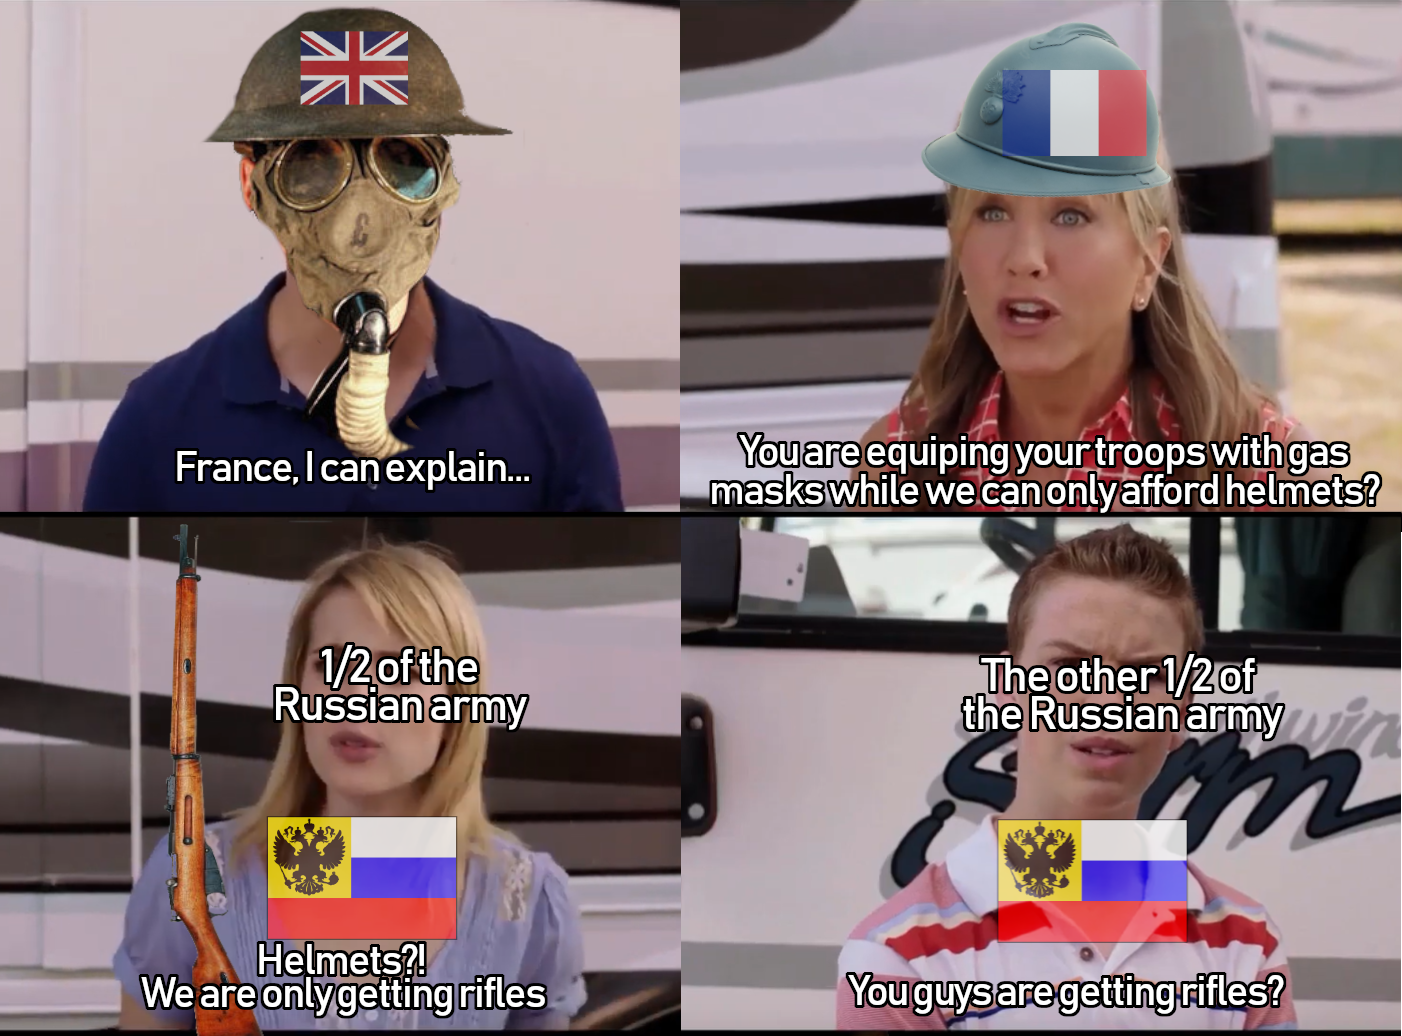 I was reading about the early stages of WWI when I though of this